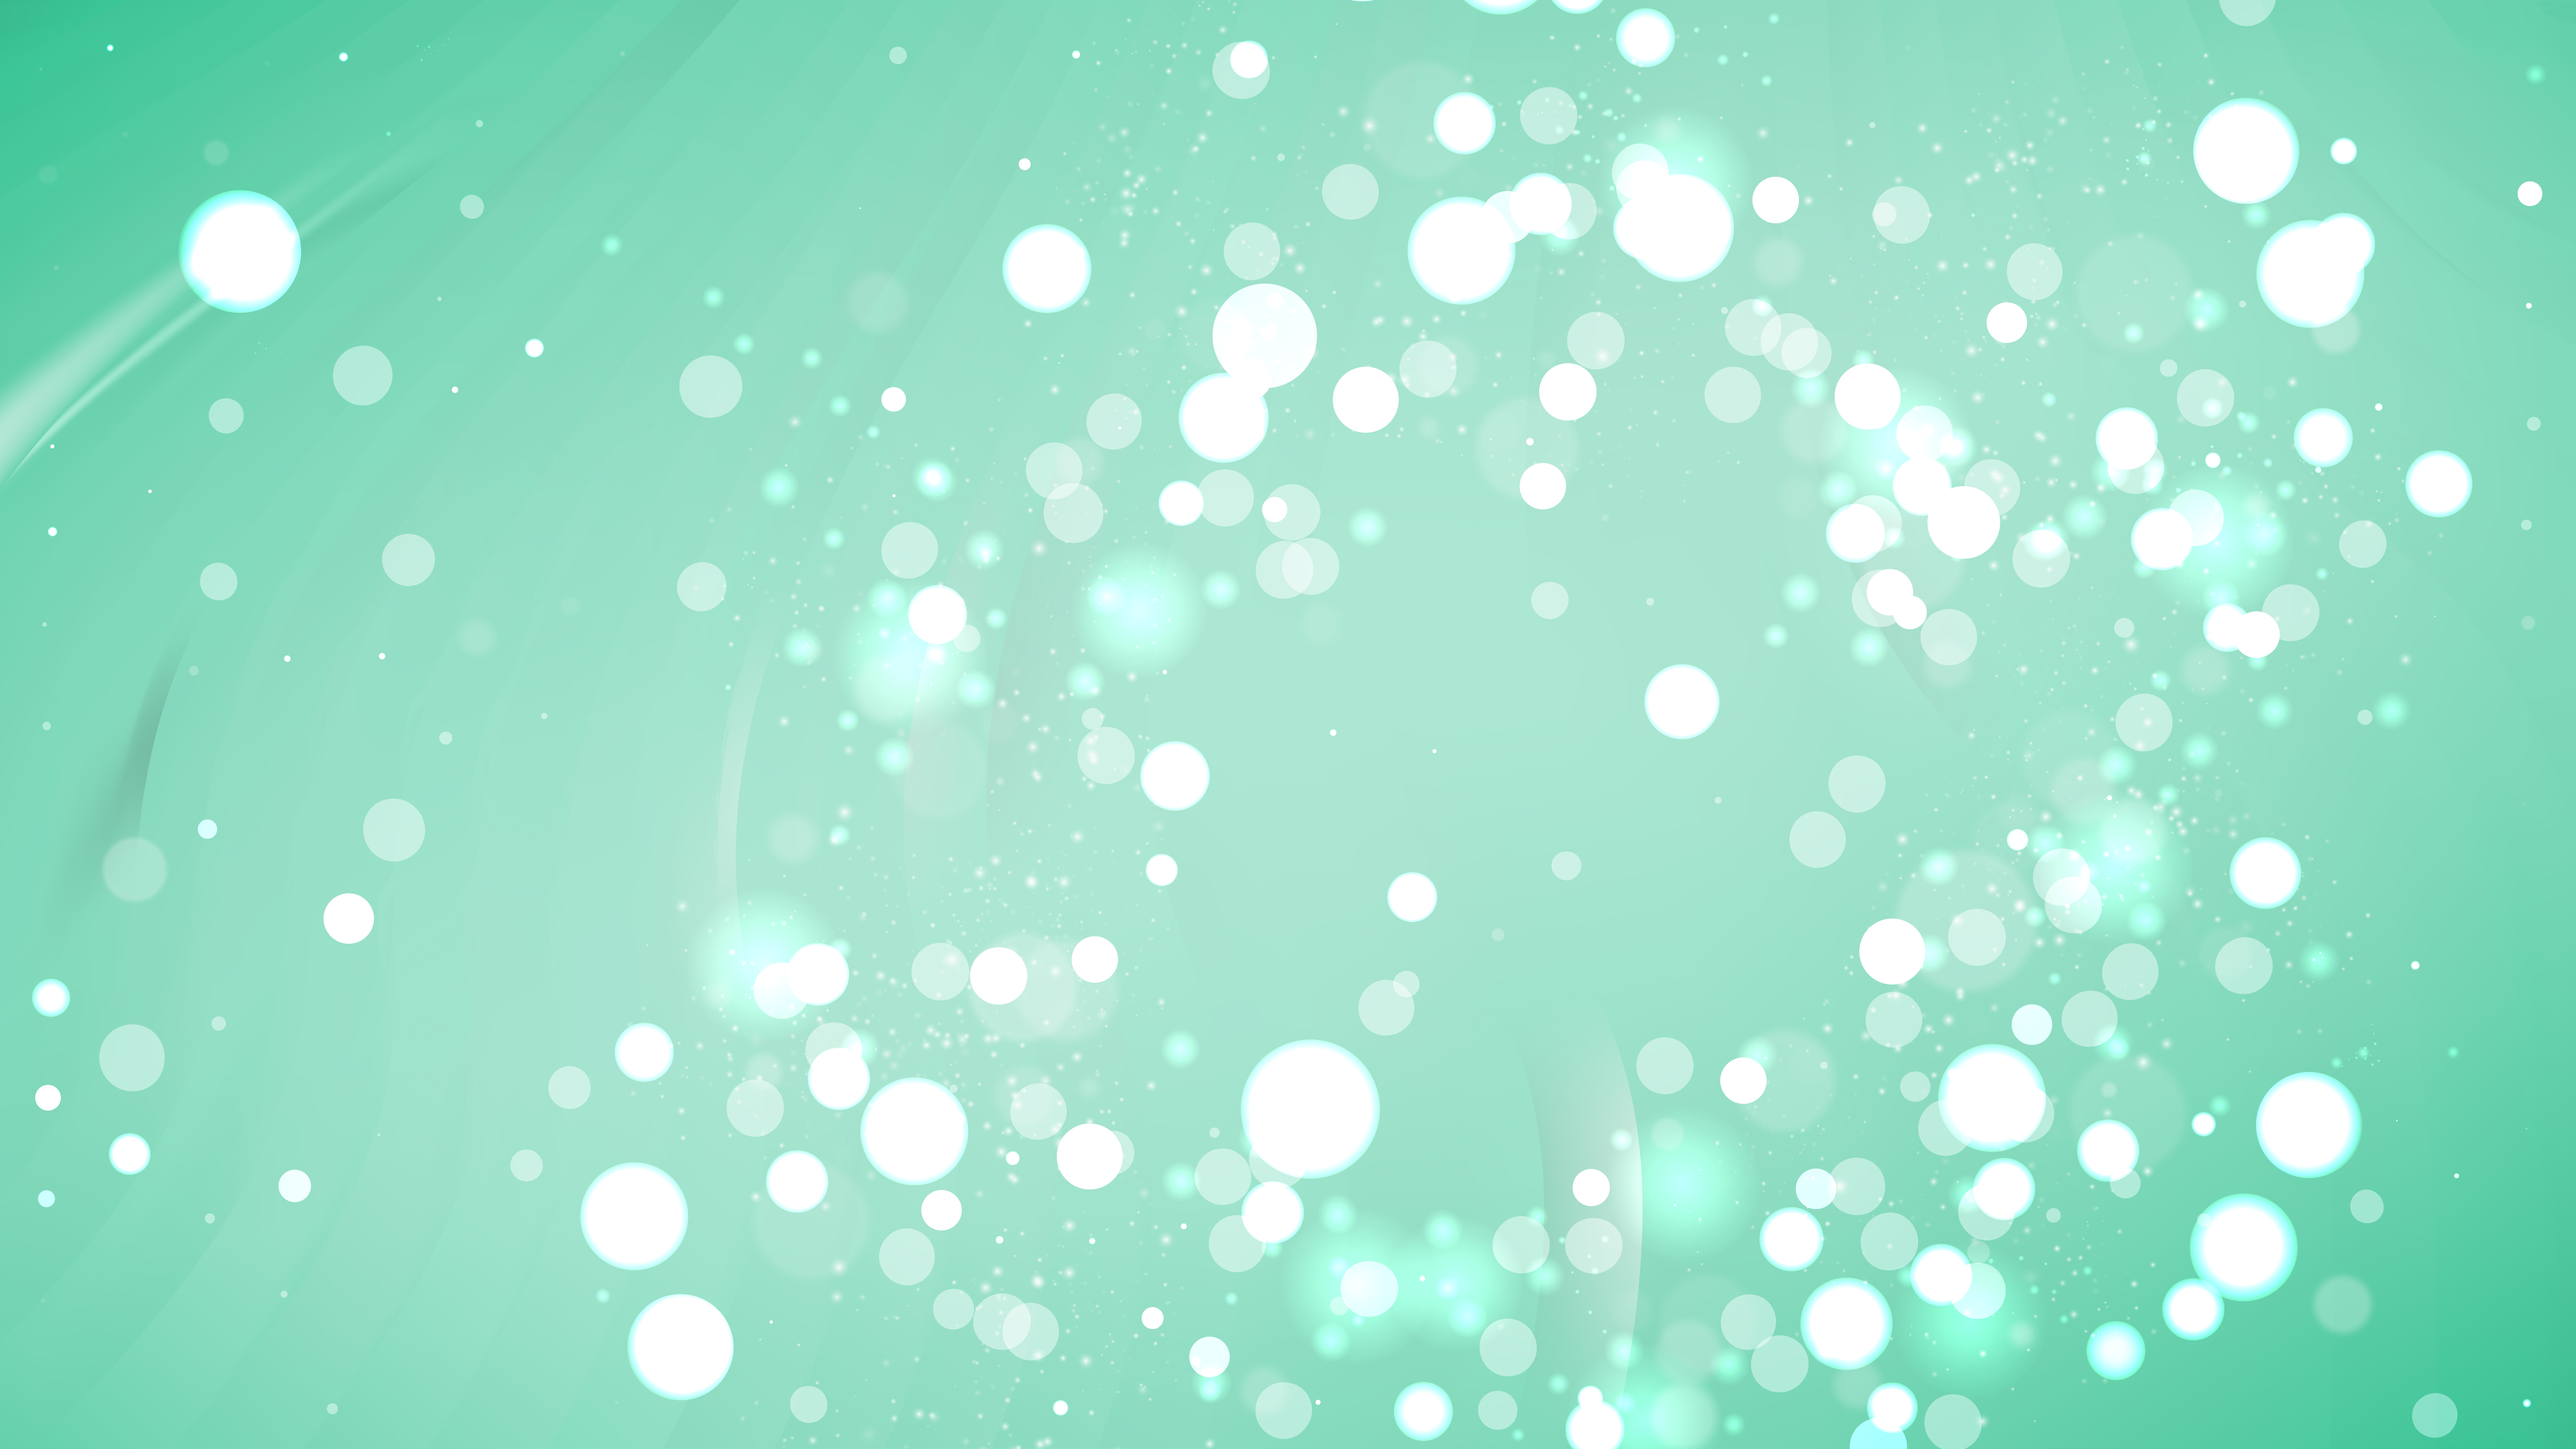 Free Abstract Mint Green Bokeh Lights Background Vector